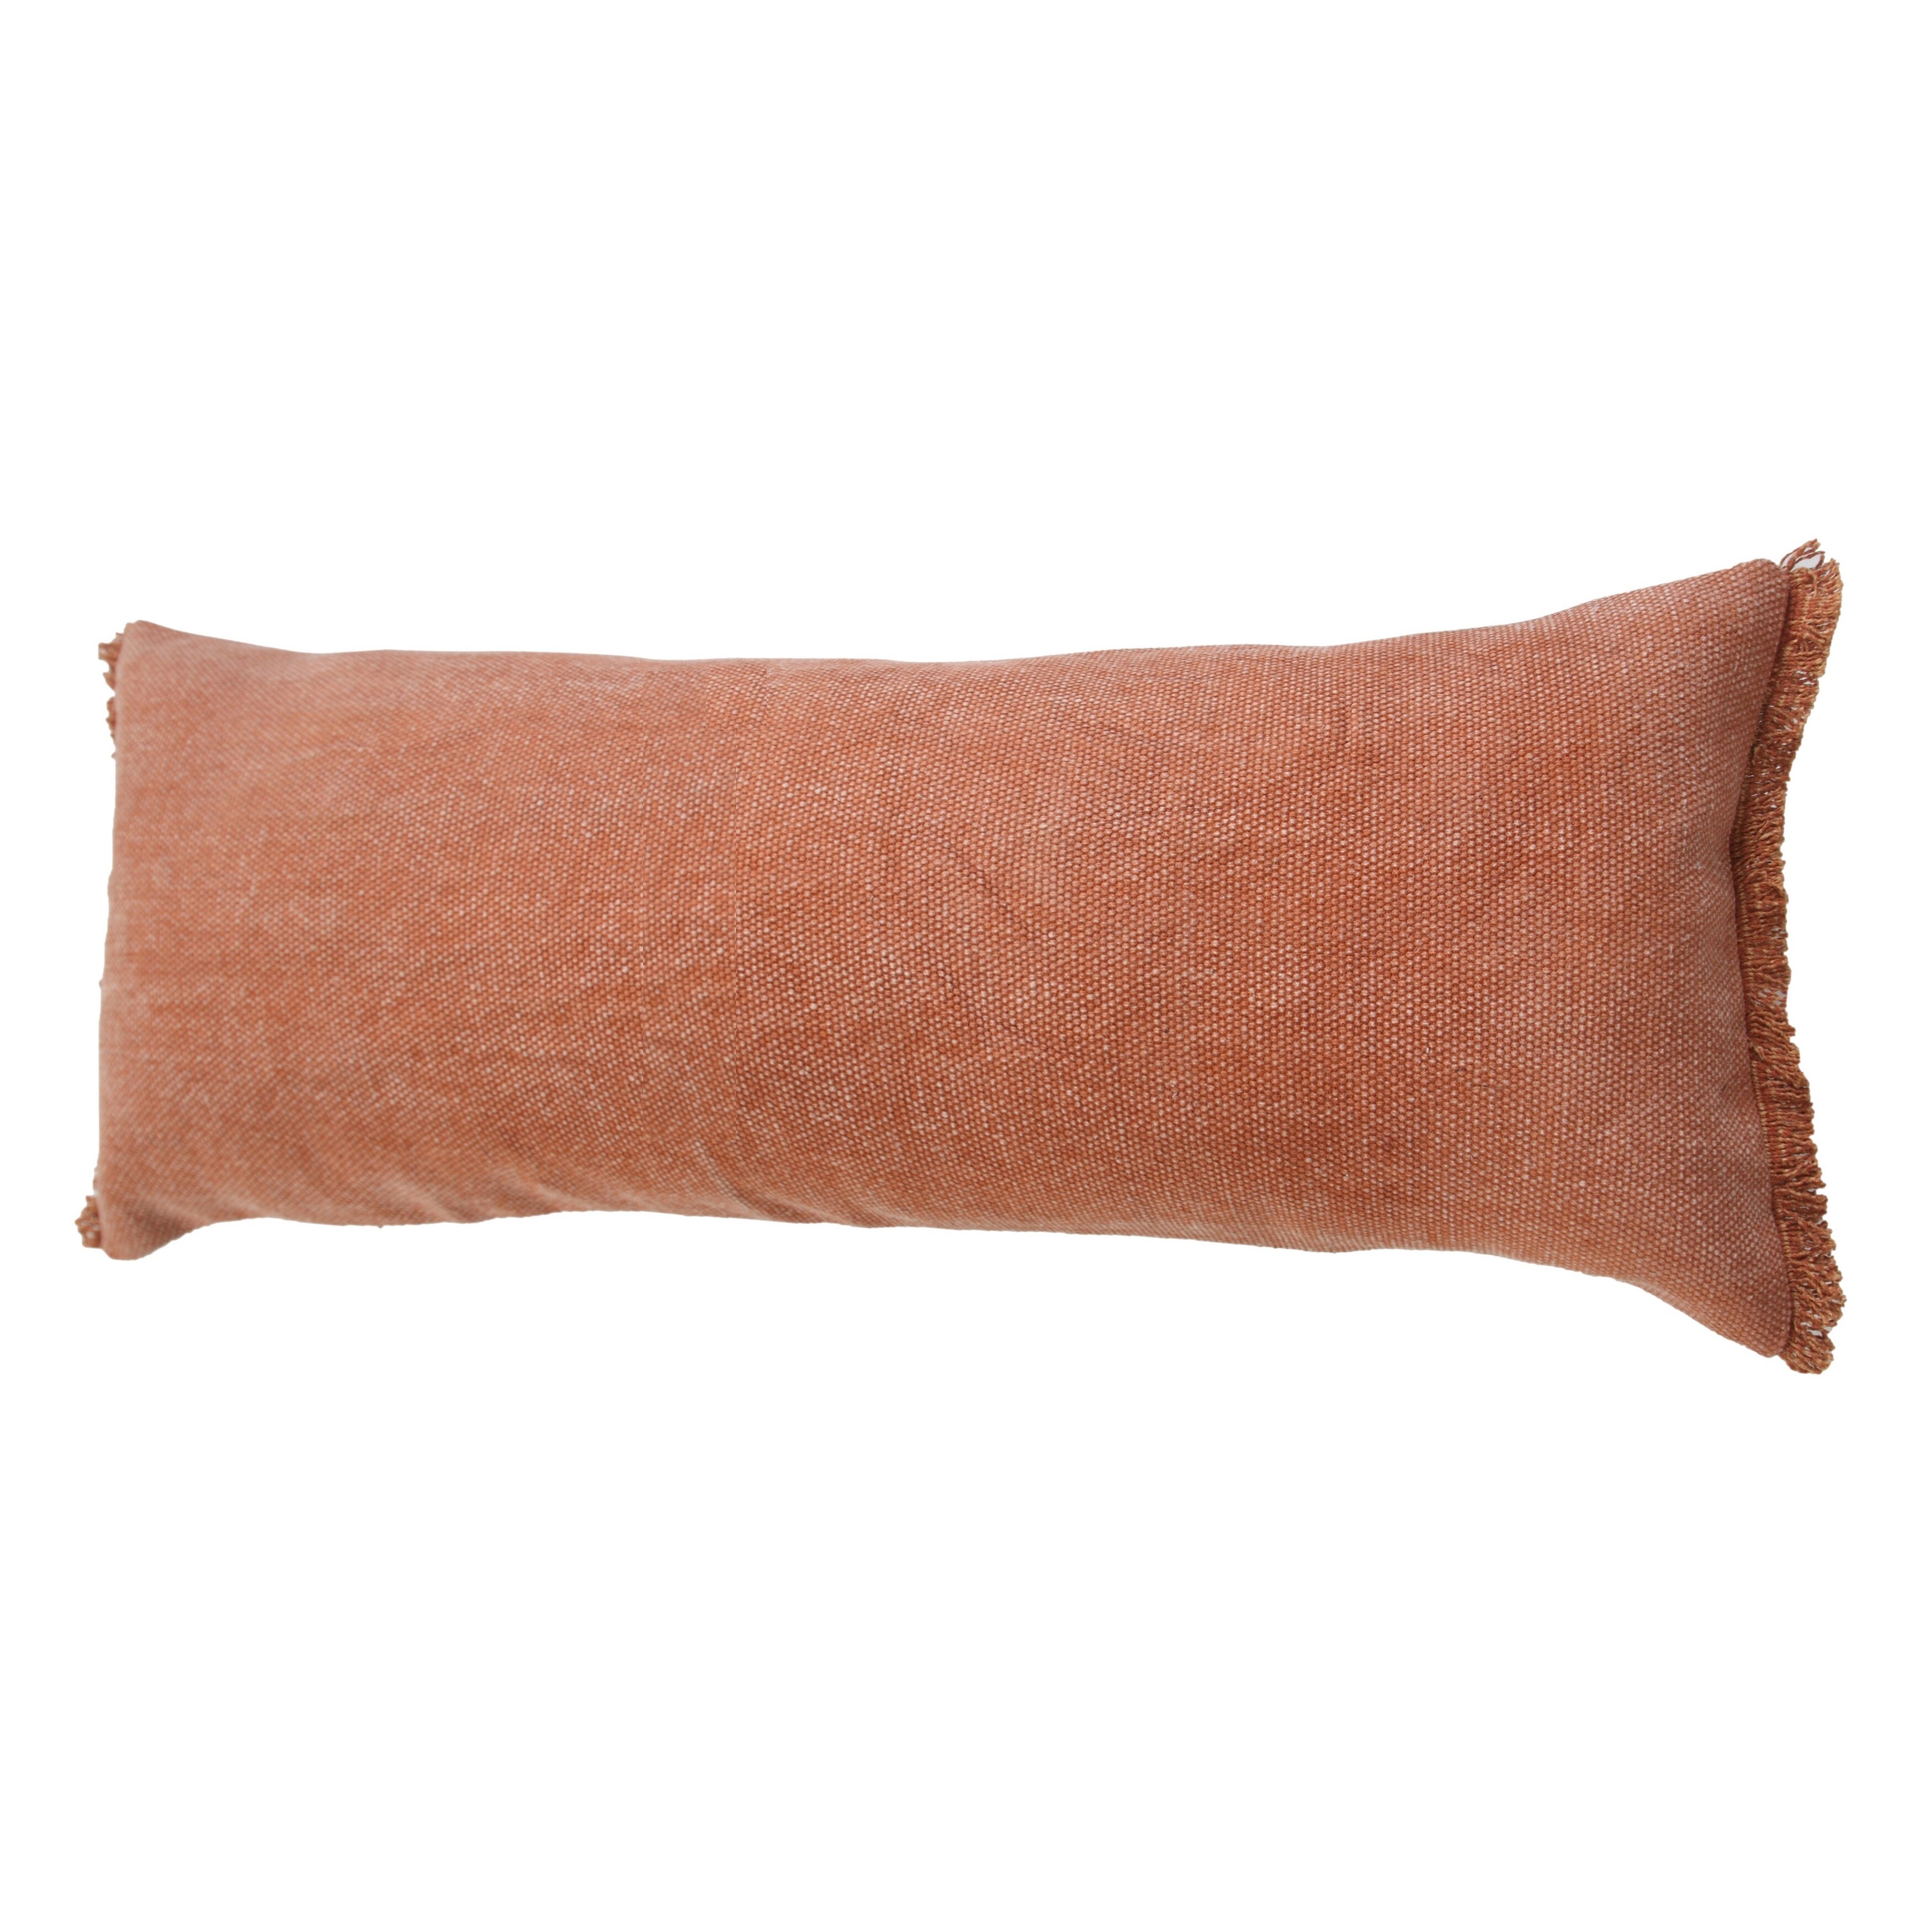 https://ak1.ostkcdn.com/images/products/is/images/direct/ba0b6c1455a2c619df7bd6f794104a021624ceef/Adobe-Brown-Solid-Stonewash-Throw-Pillow-with-Fringe.jpg